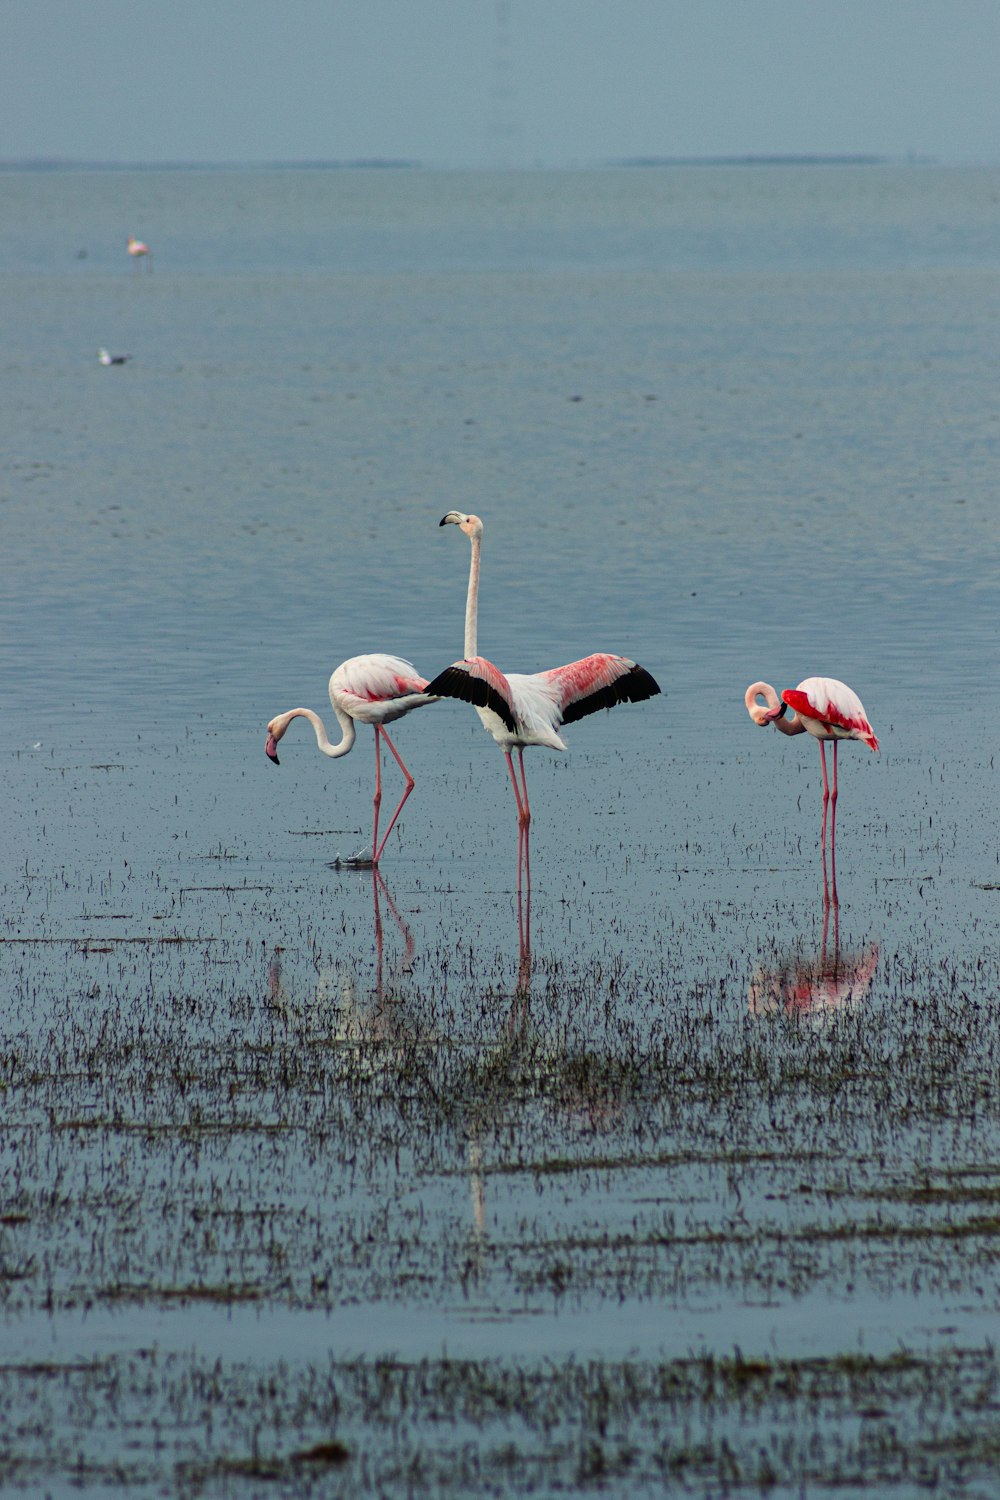 three flamingos standing in shallow water on a beach